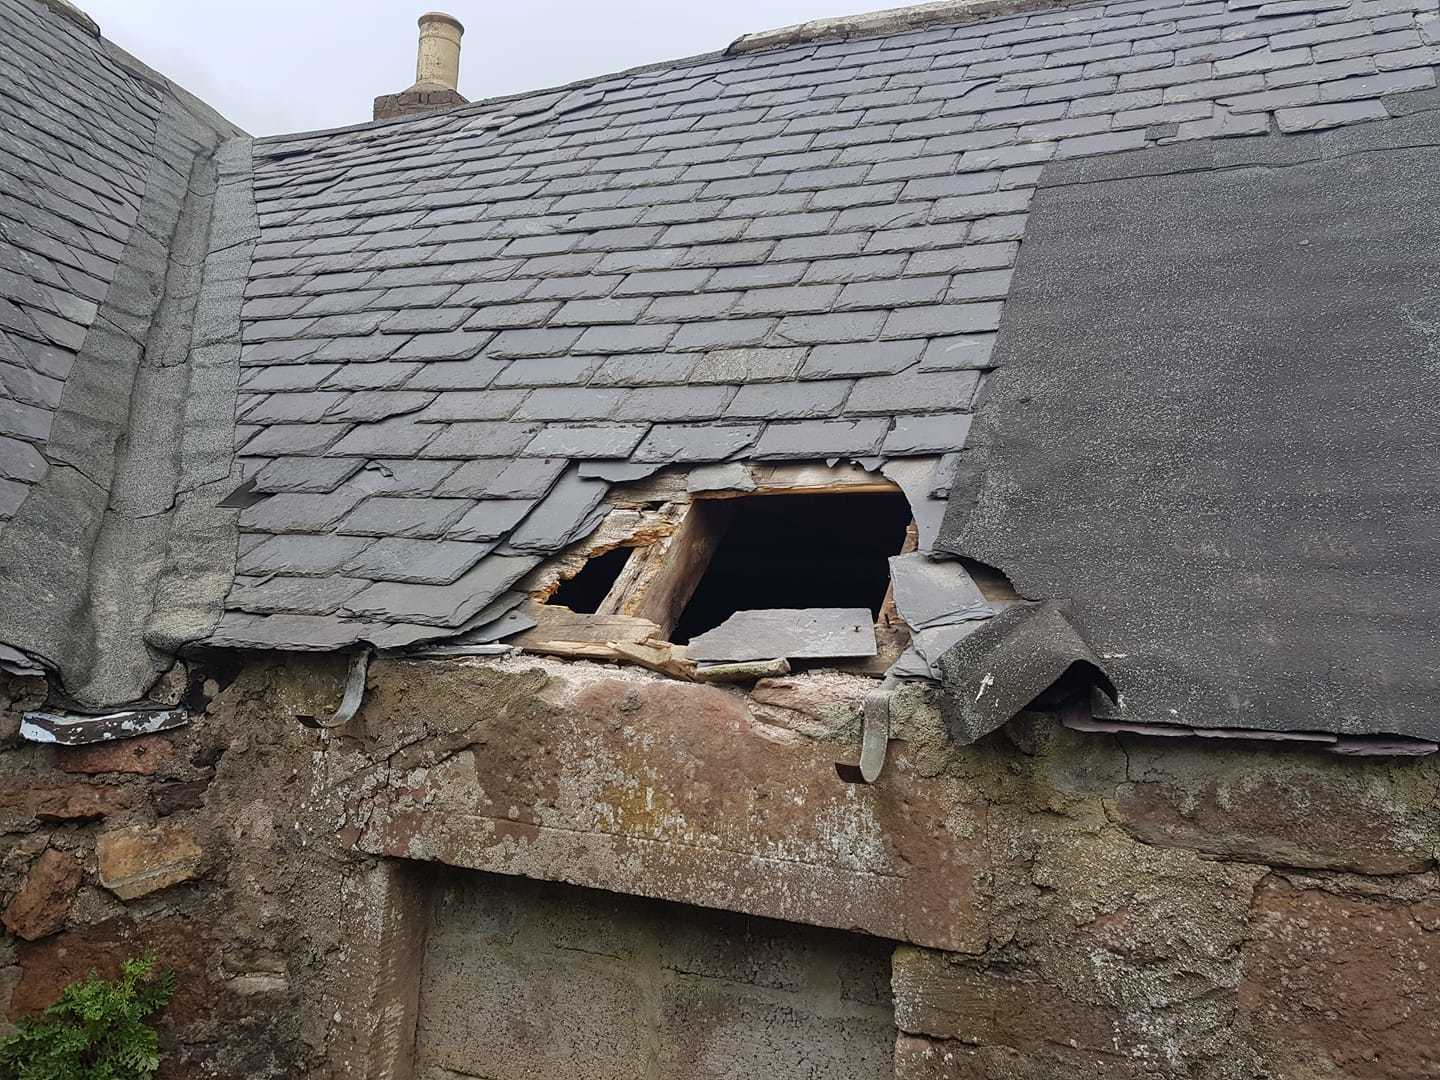 The damaged roof.